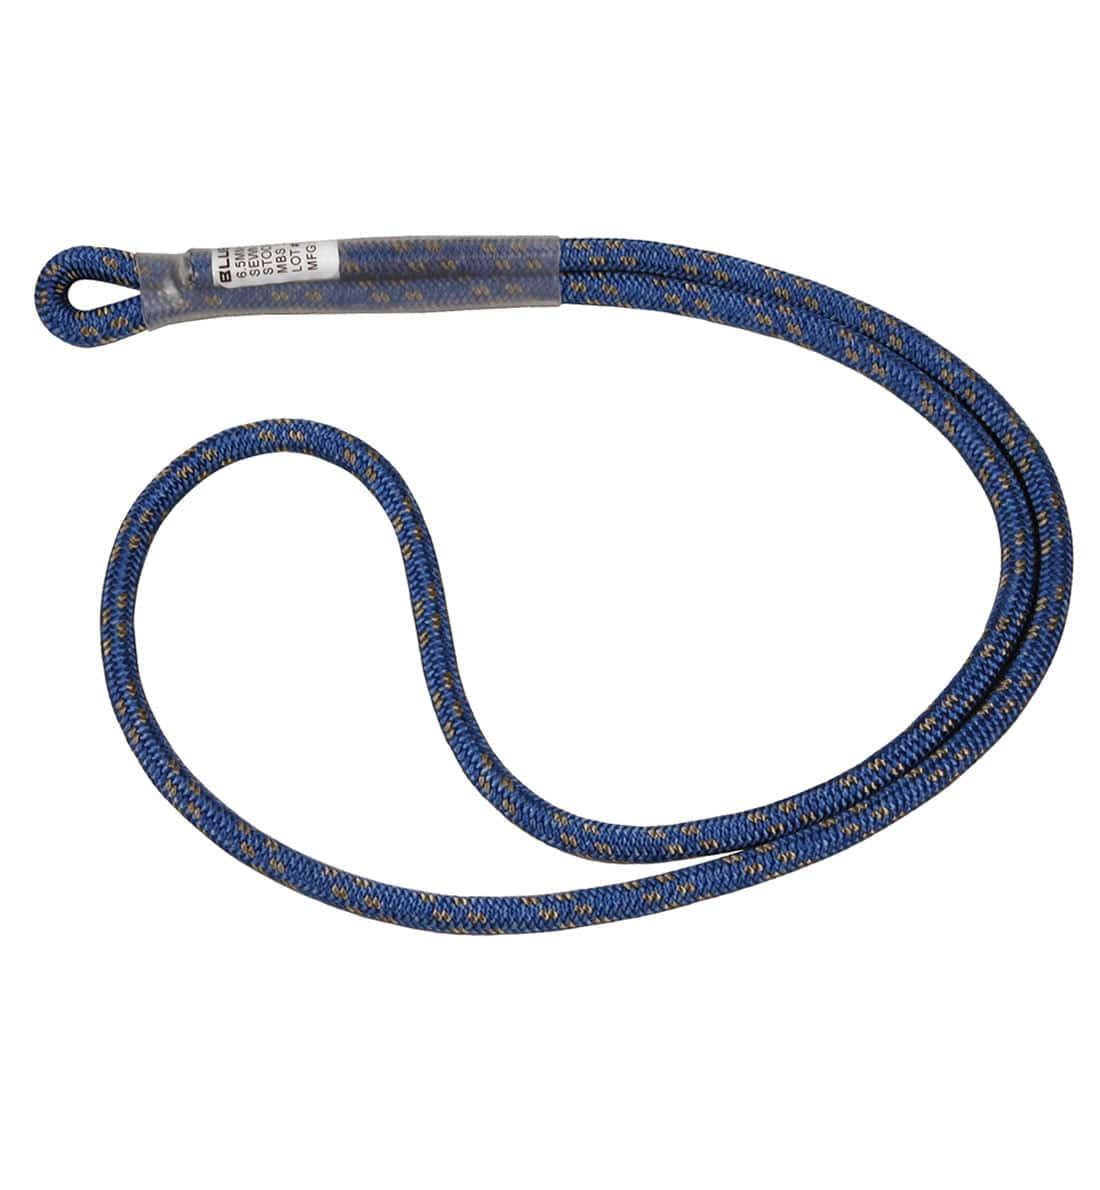 7mm VT PRUSIK - BlueWater Ropes